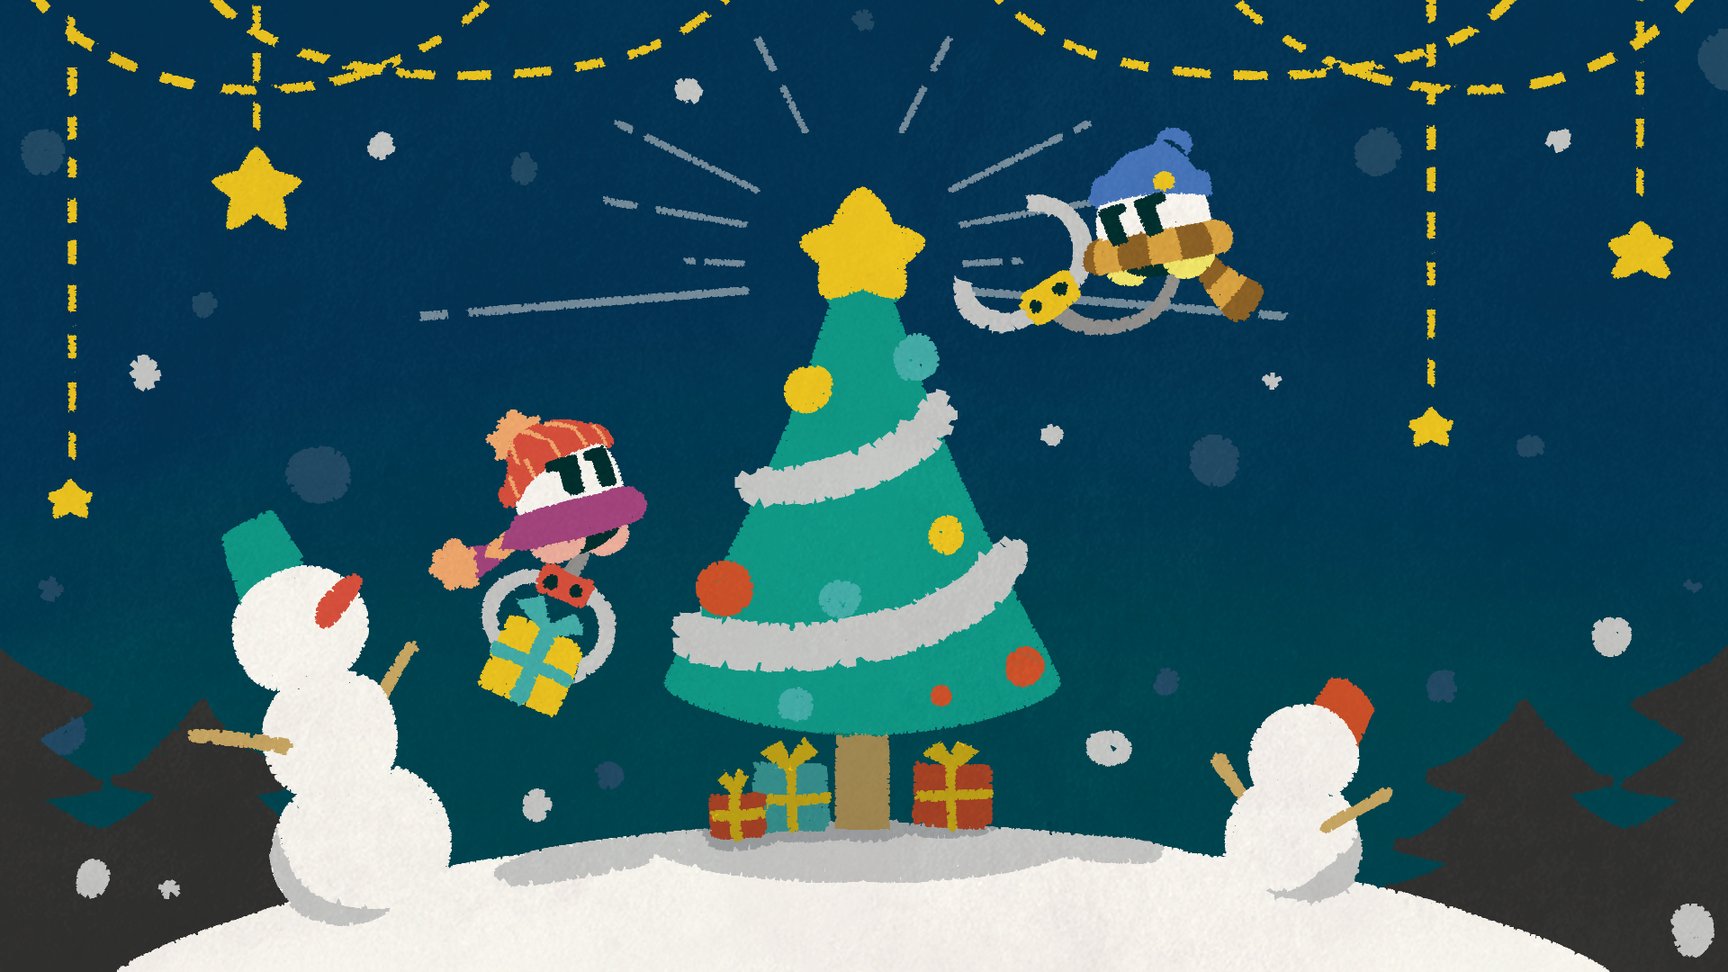 HAL The Part GoNintendo Time | Archives for | GoNintendo holiday-themed artwork UFO releases